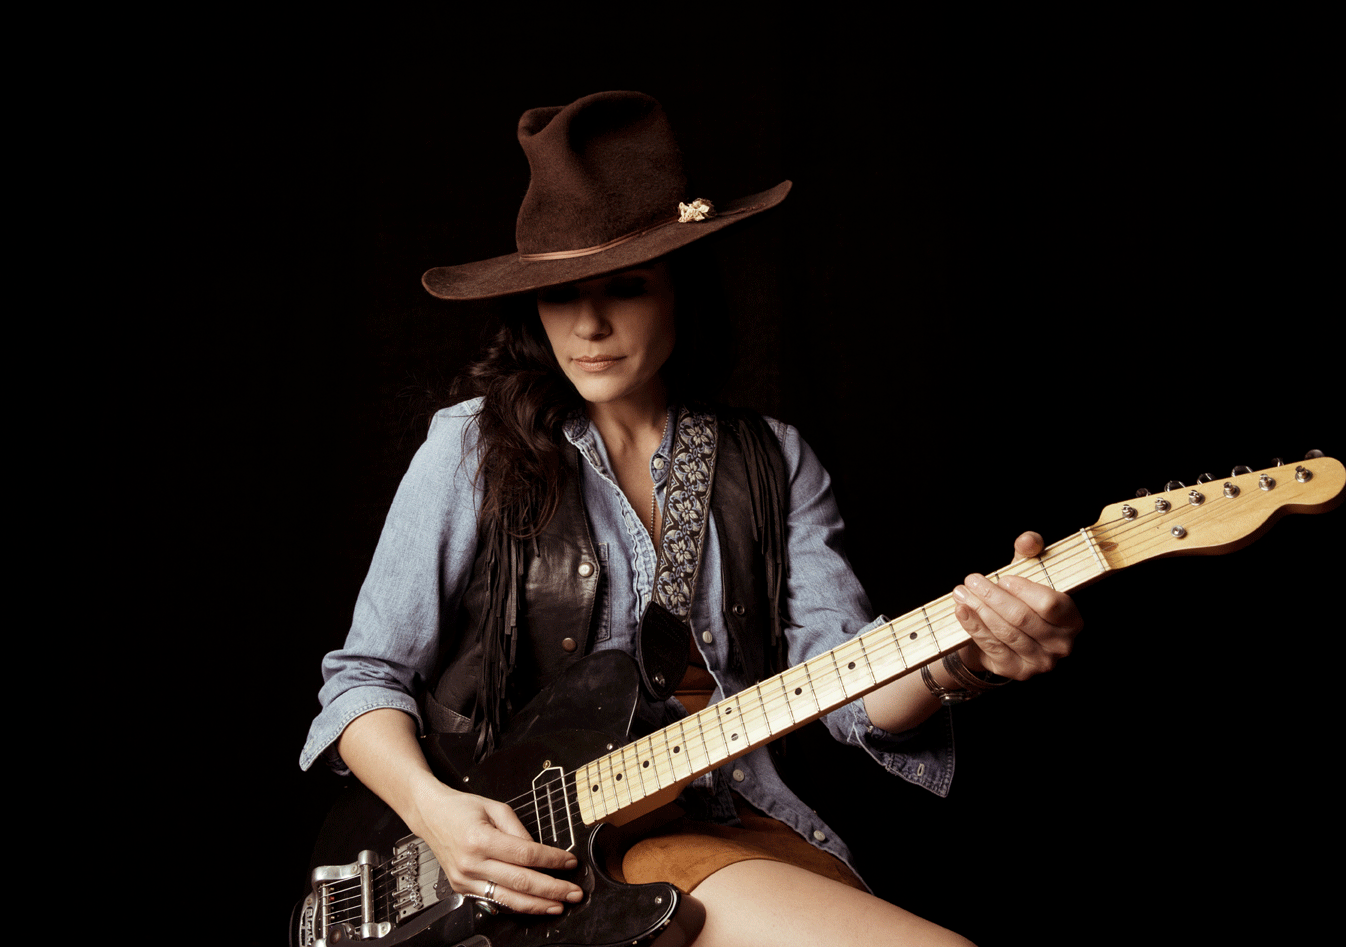 Video Premiere: Shannon McNally “Black Rose” from Her Forthcoming  Album Evoking the Songs and Spirit of Waylon Jennings